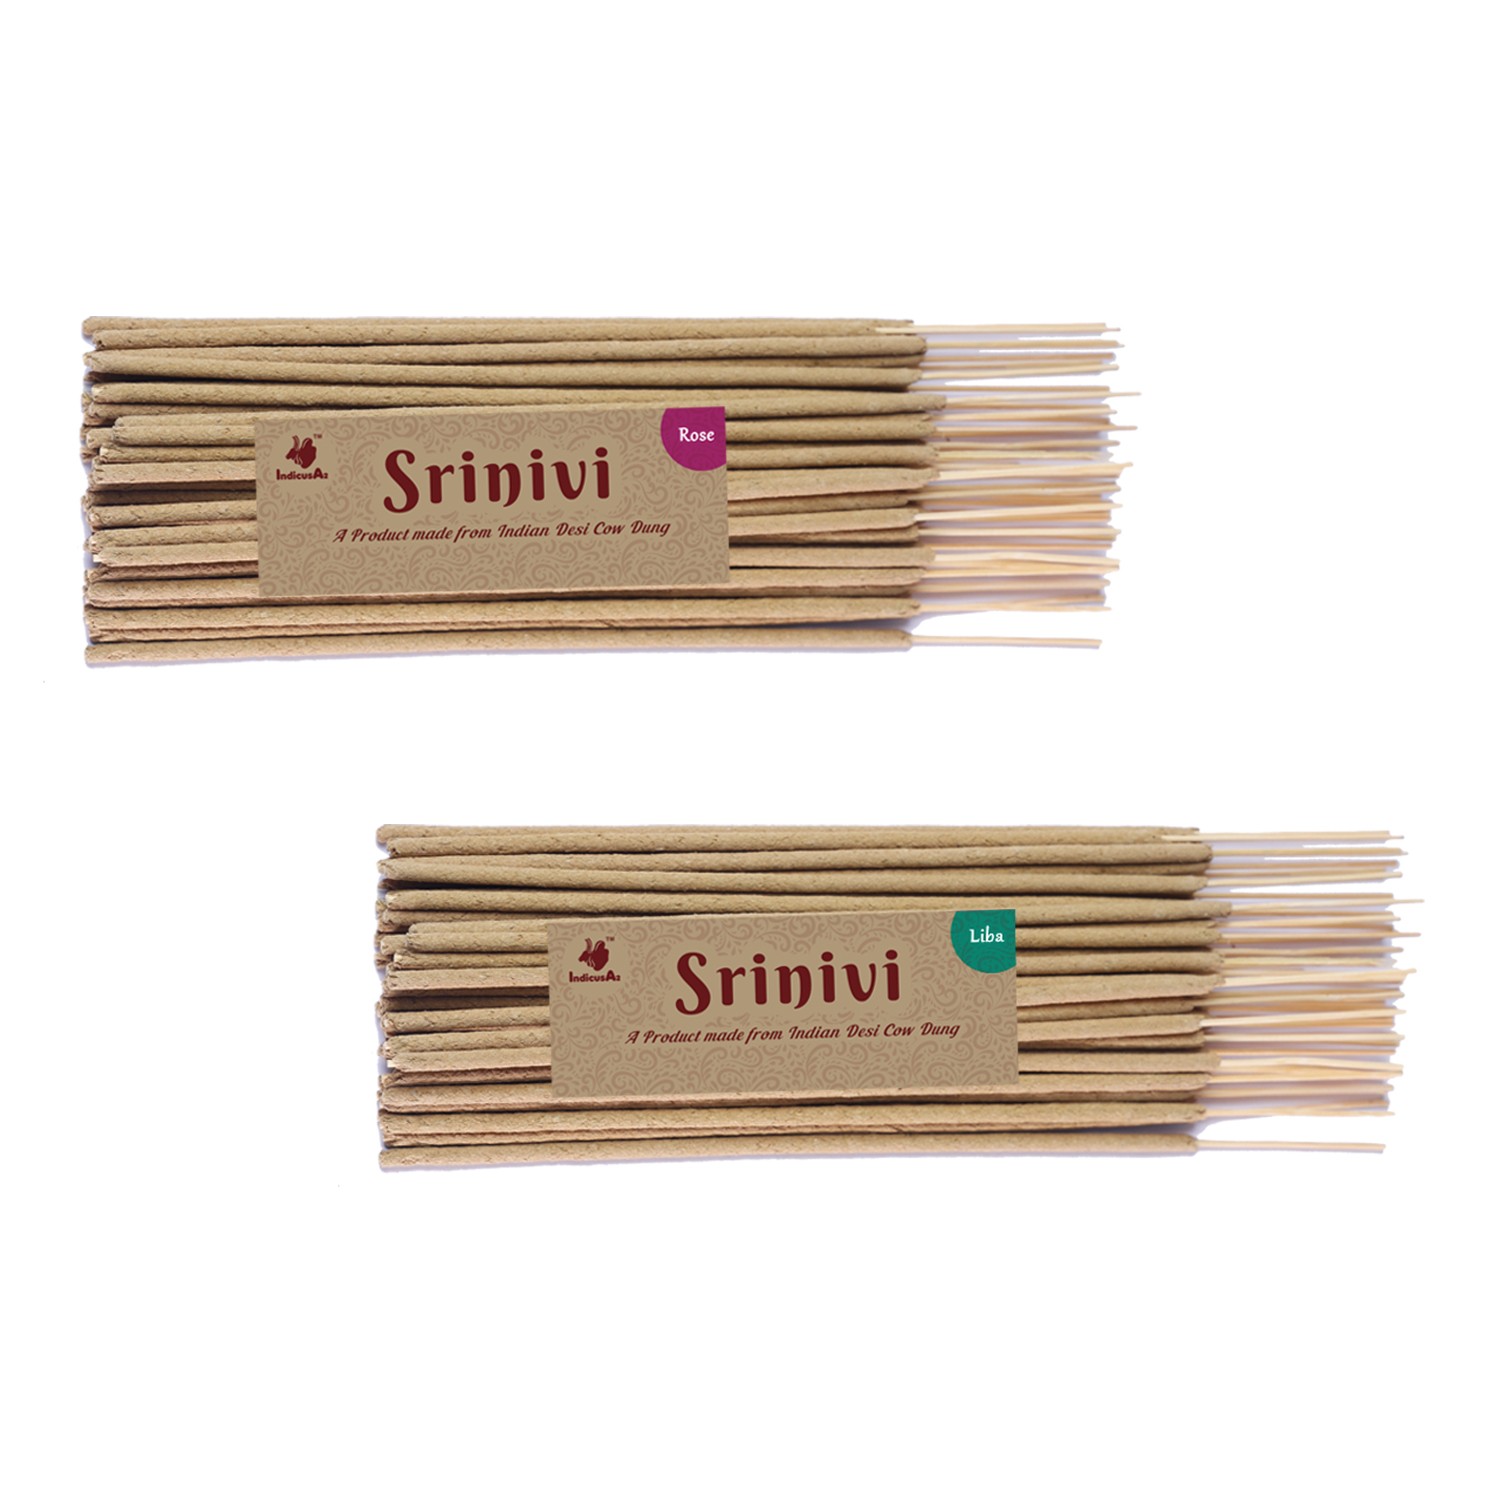 Srinivi Agarbattis - Made up of desi cow dung|Pack of 2|Each pack consists of 35 sticks|Fragrance – Rose, Liba.